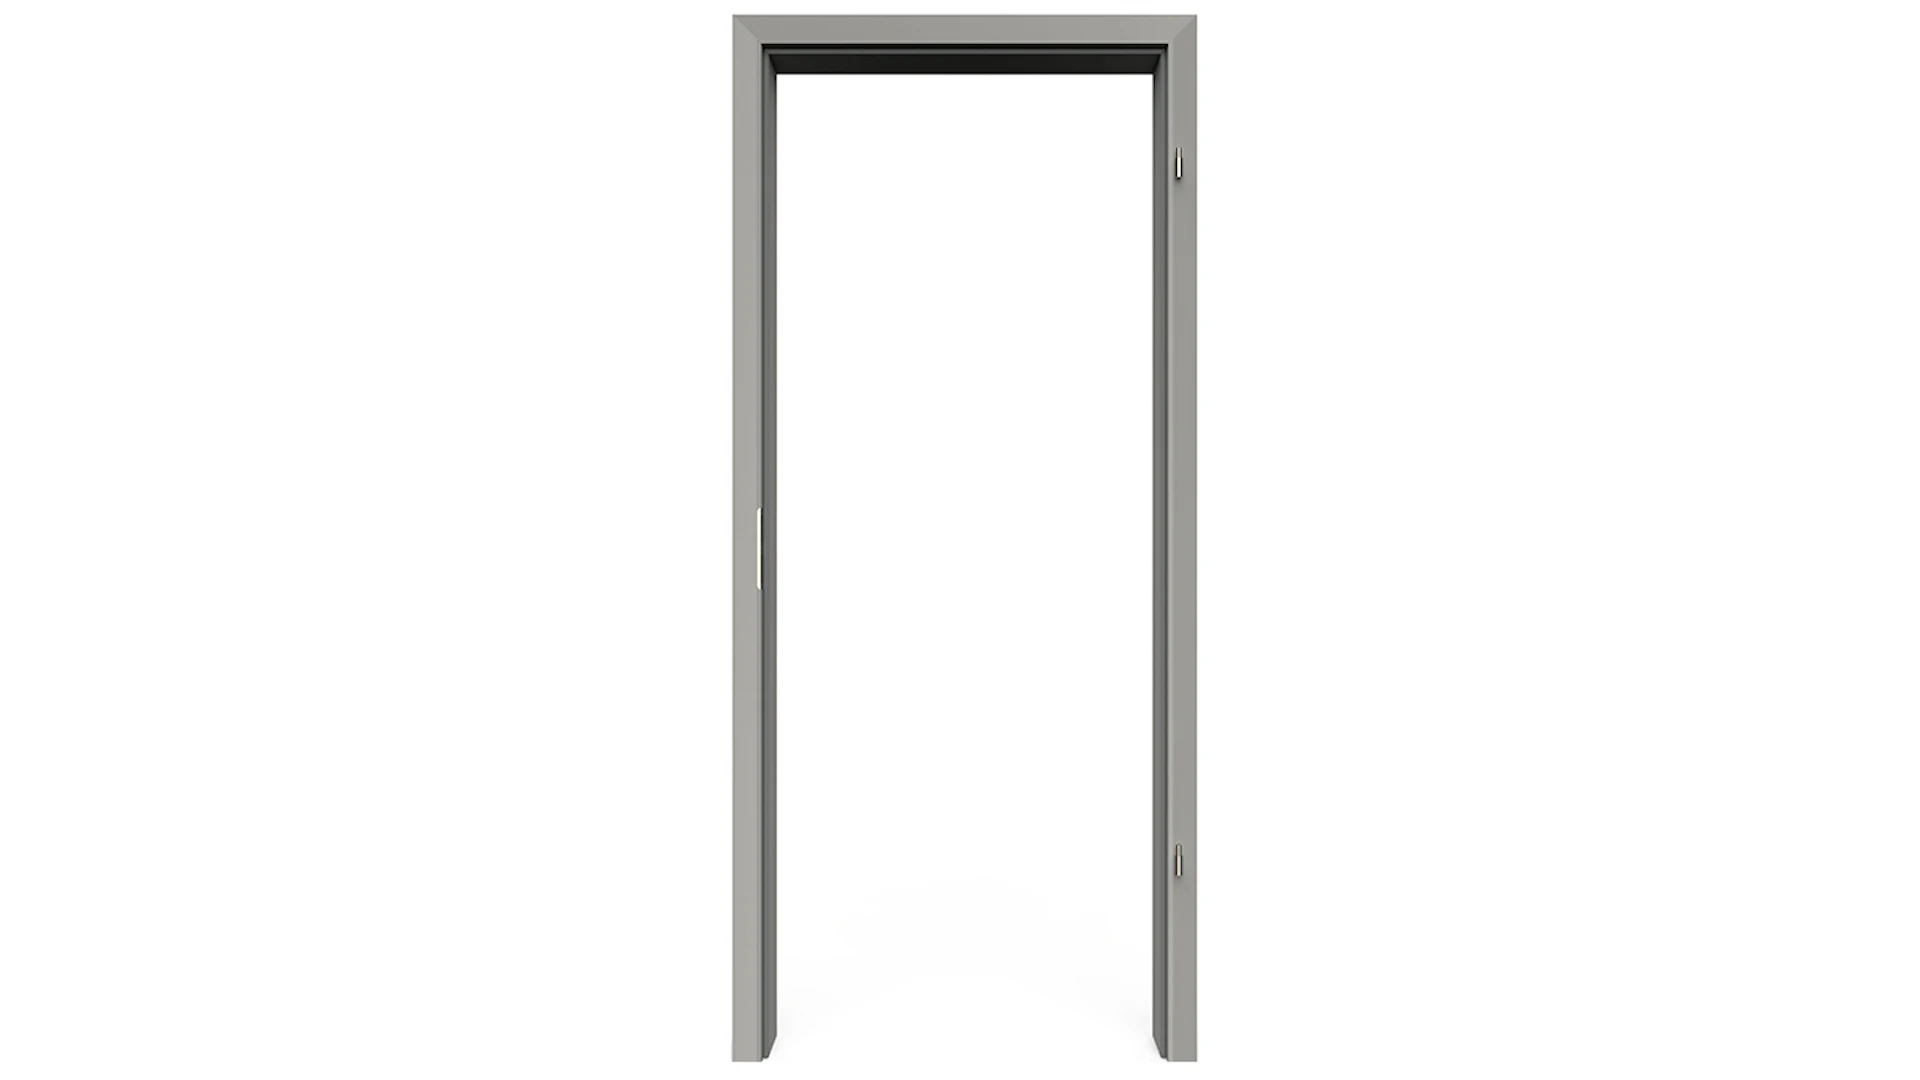 planeo Standard frame, rounded edge - CPL Silver grey - 2110 x 860 x 180 mm DIN Right